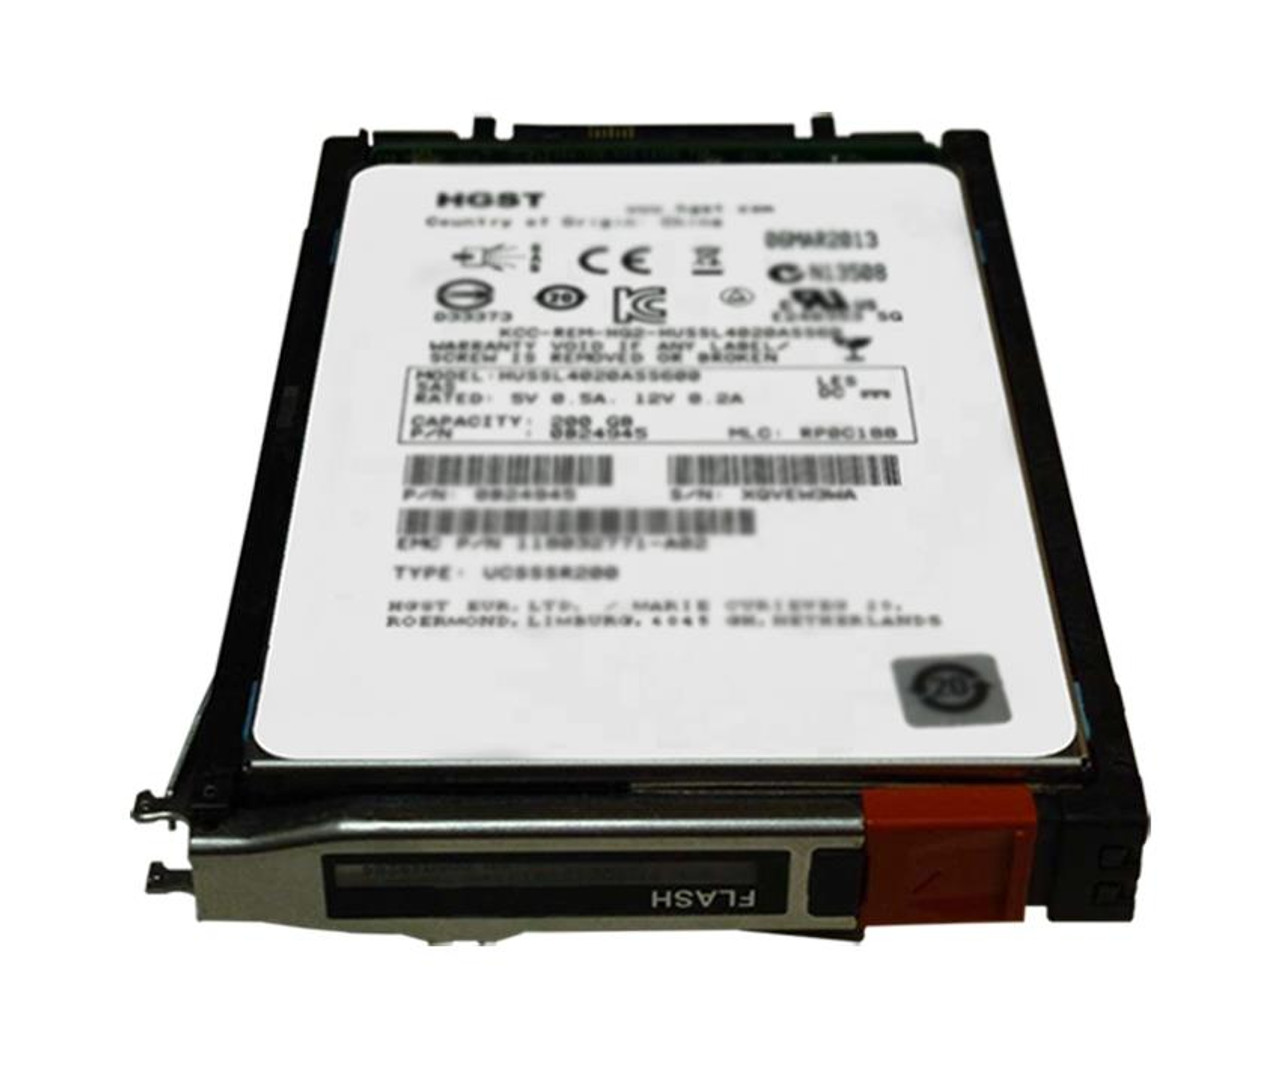 V5-2S6FX-800 EMC 800GB SAS 6Gbps 2.5-inch Internal Solid State Drive (SSD) for VNXe1600 2.5 Enclosure